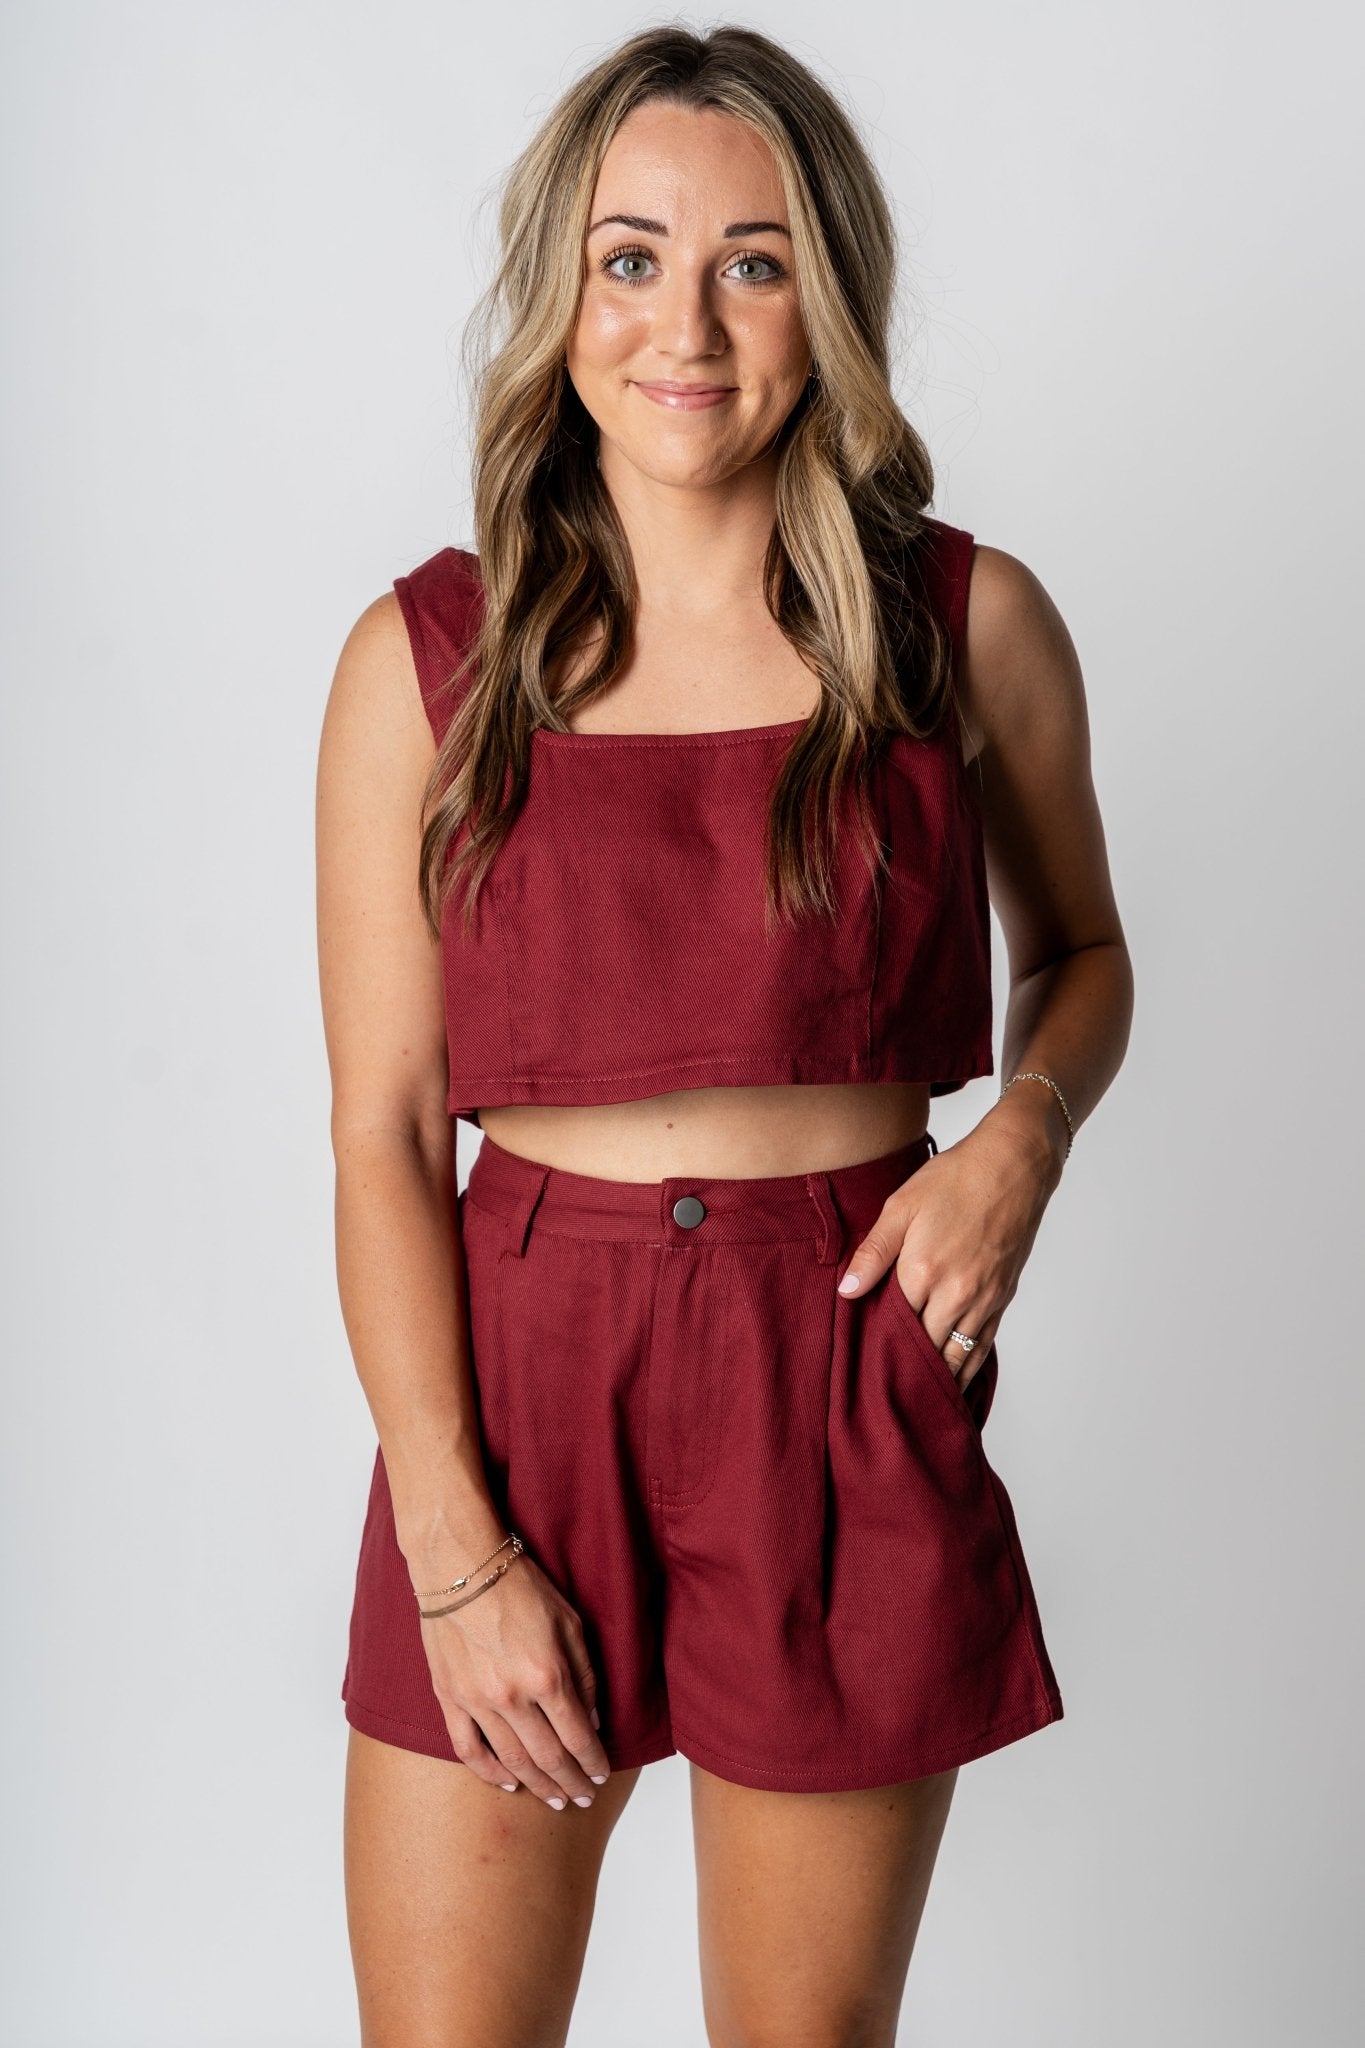 Tie back crop tank top burgundy - Affordable crop top - Boutique Tank Tops at Lush Fashion Lounge Boutique in Oklahoma City